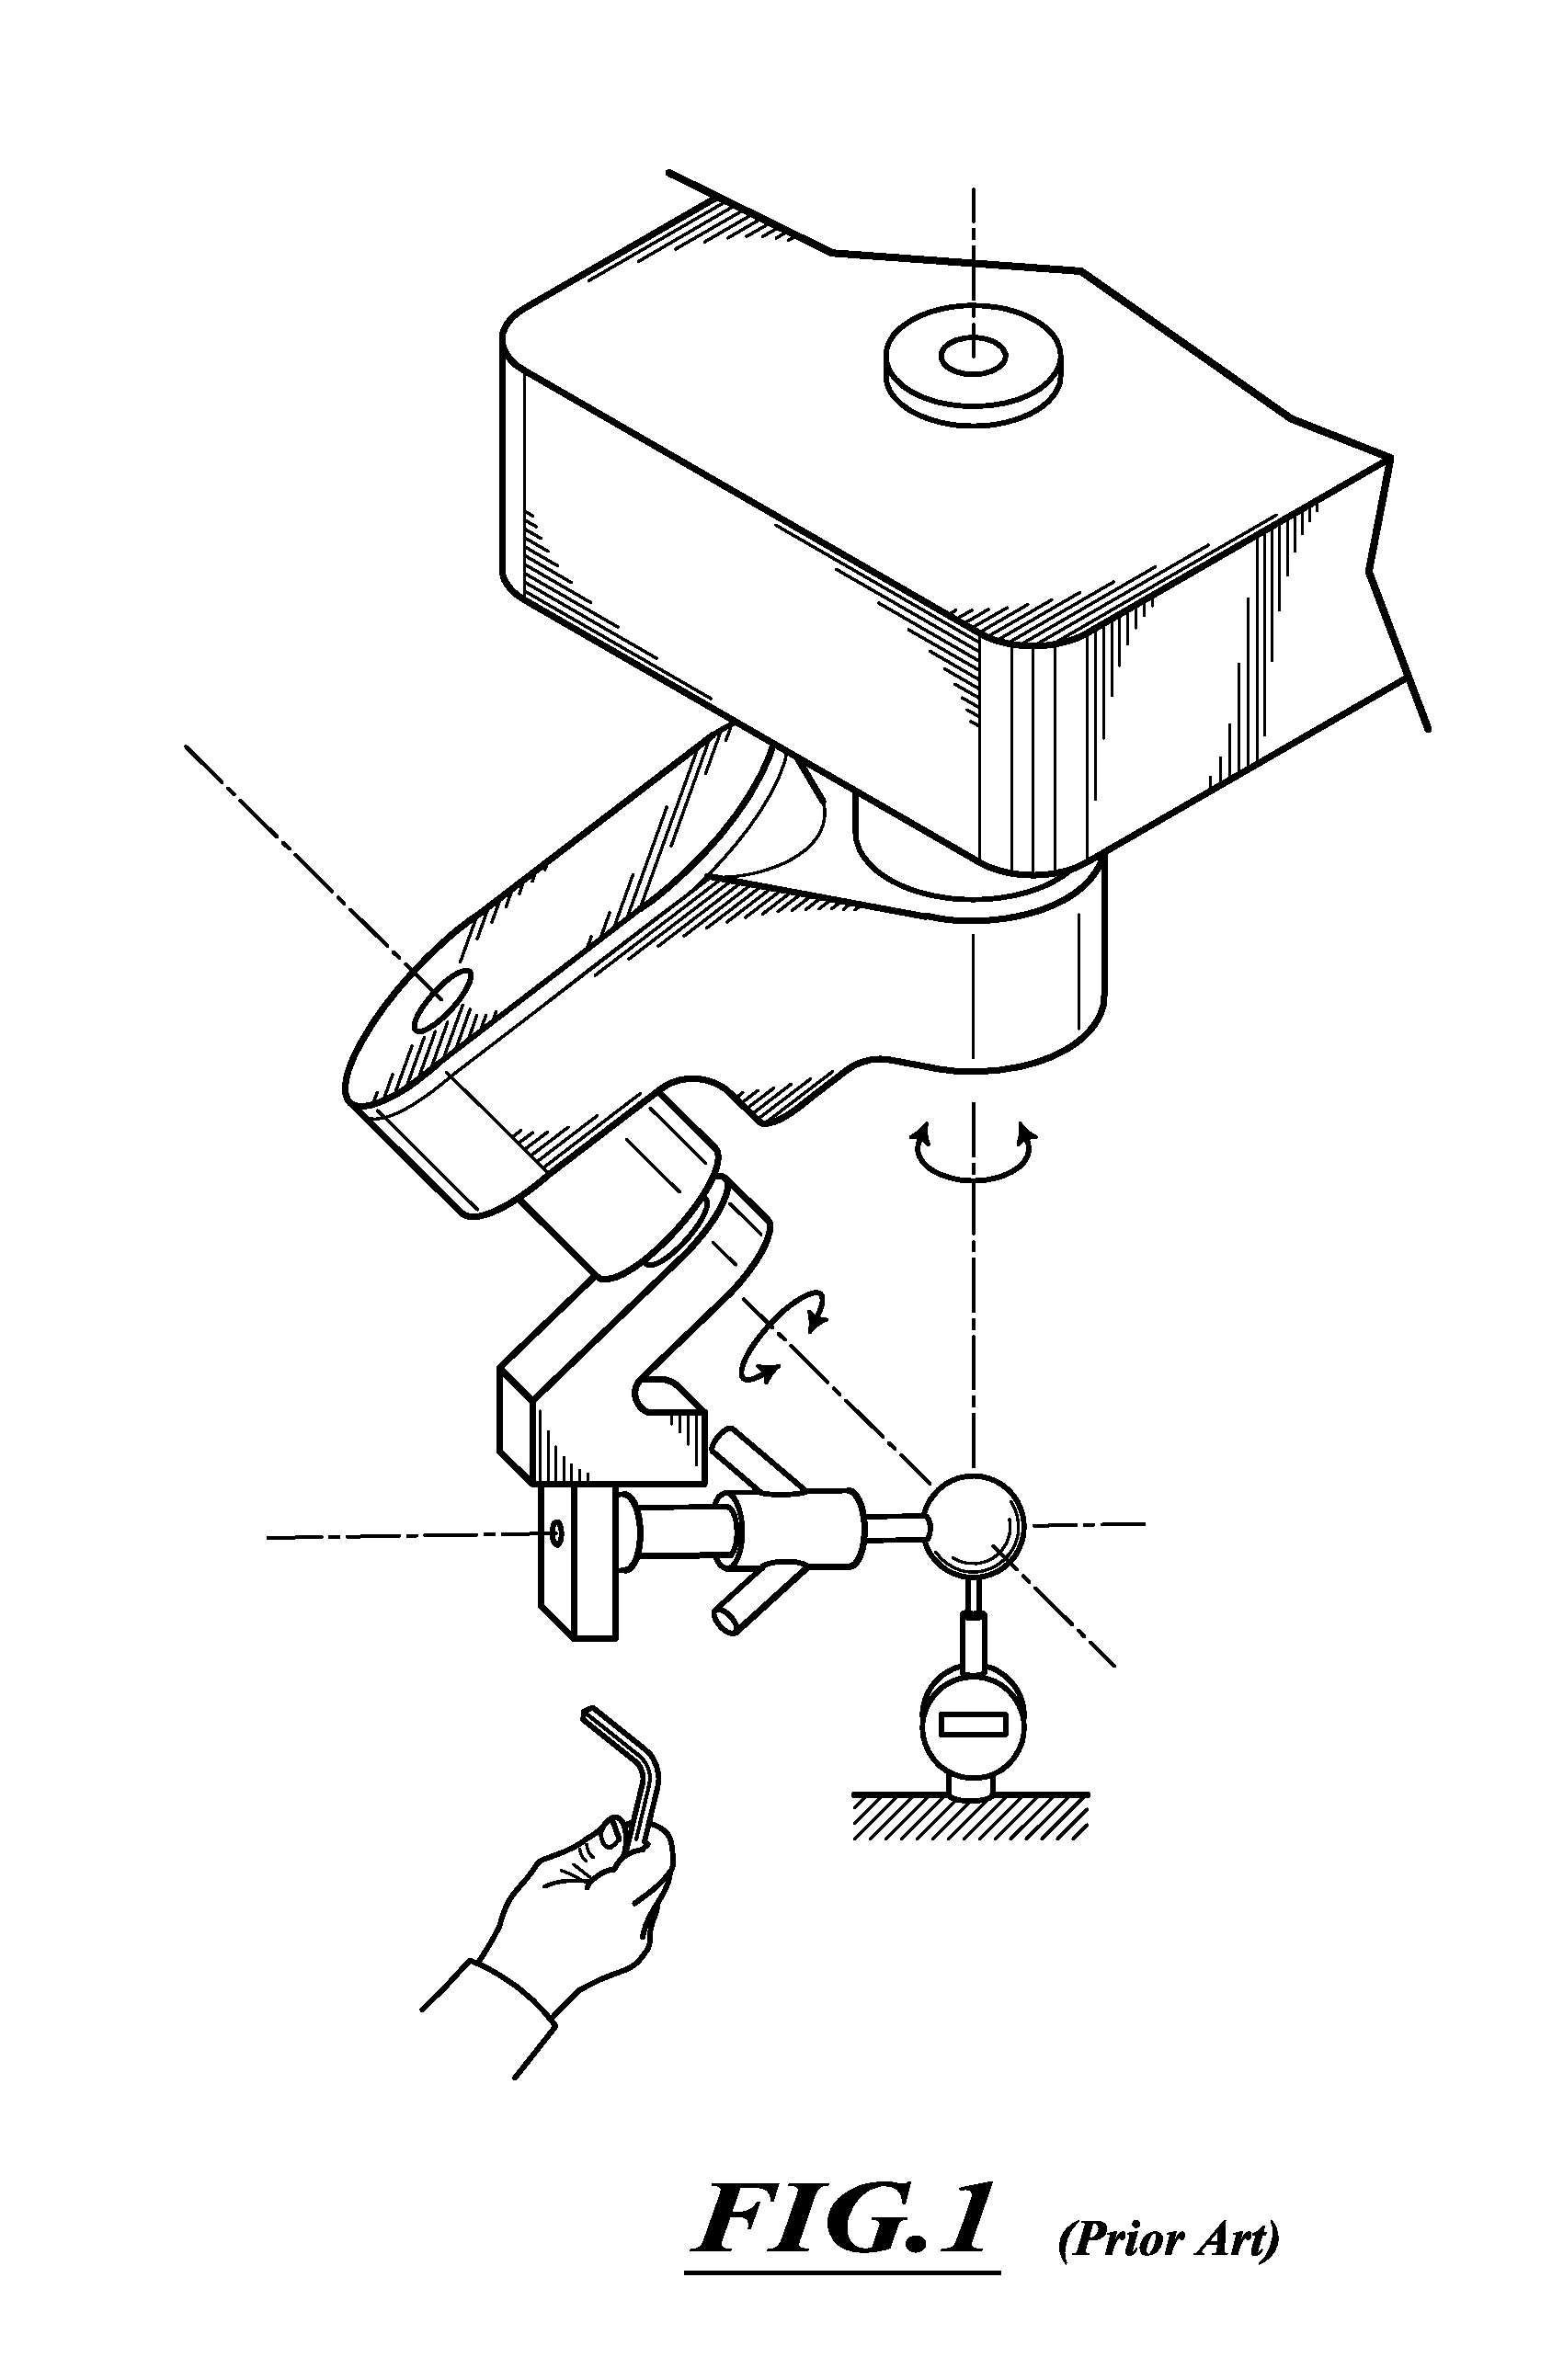 System and method for tool testing and alignment